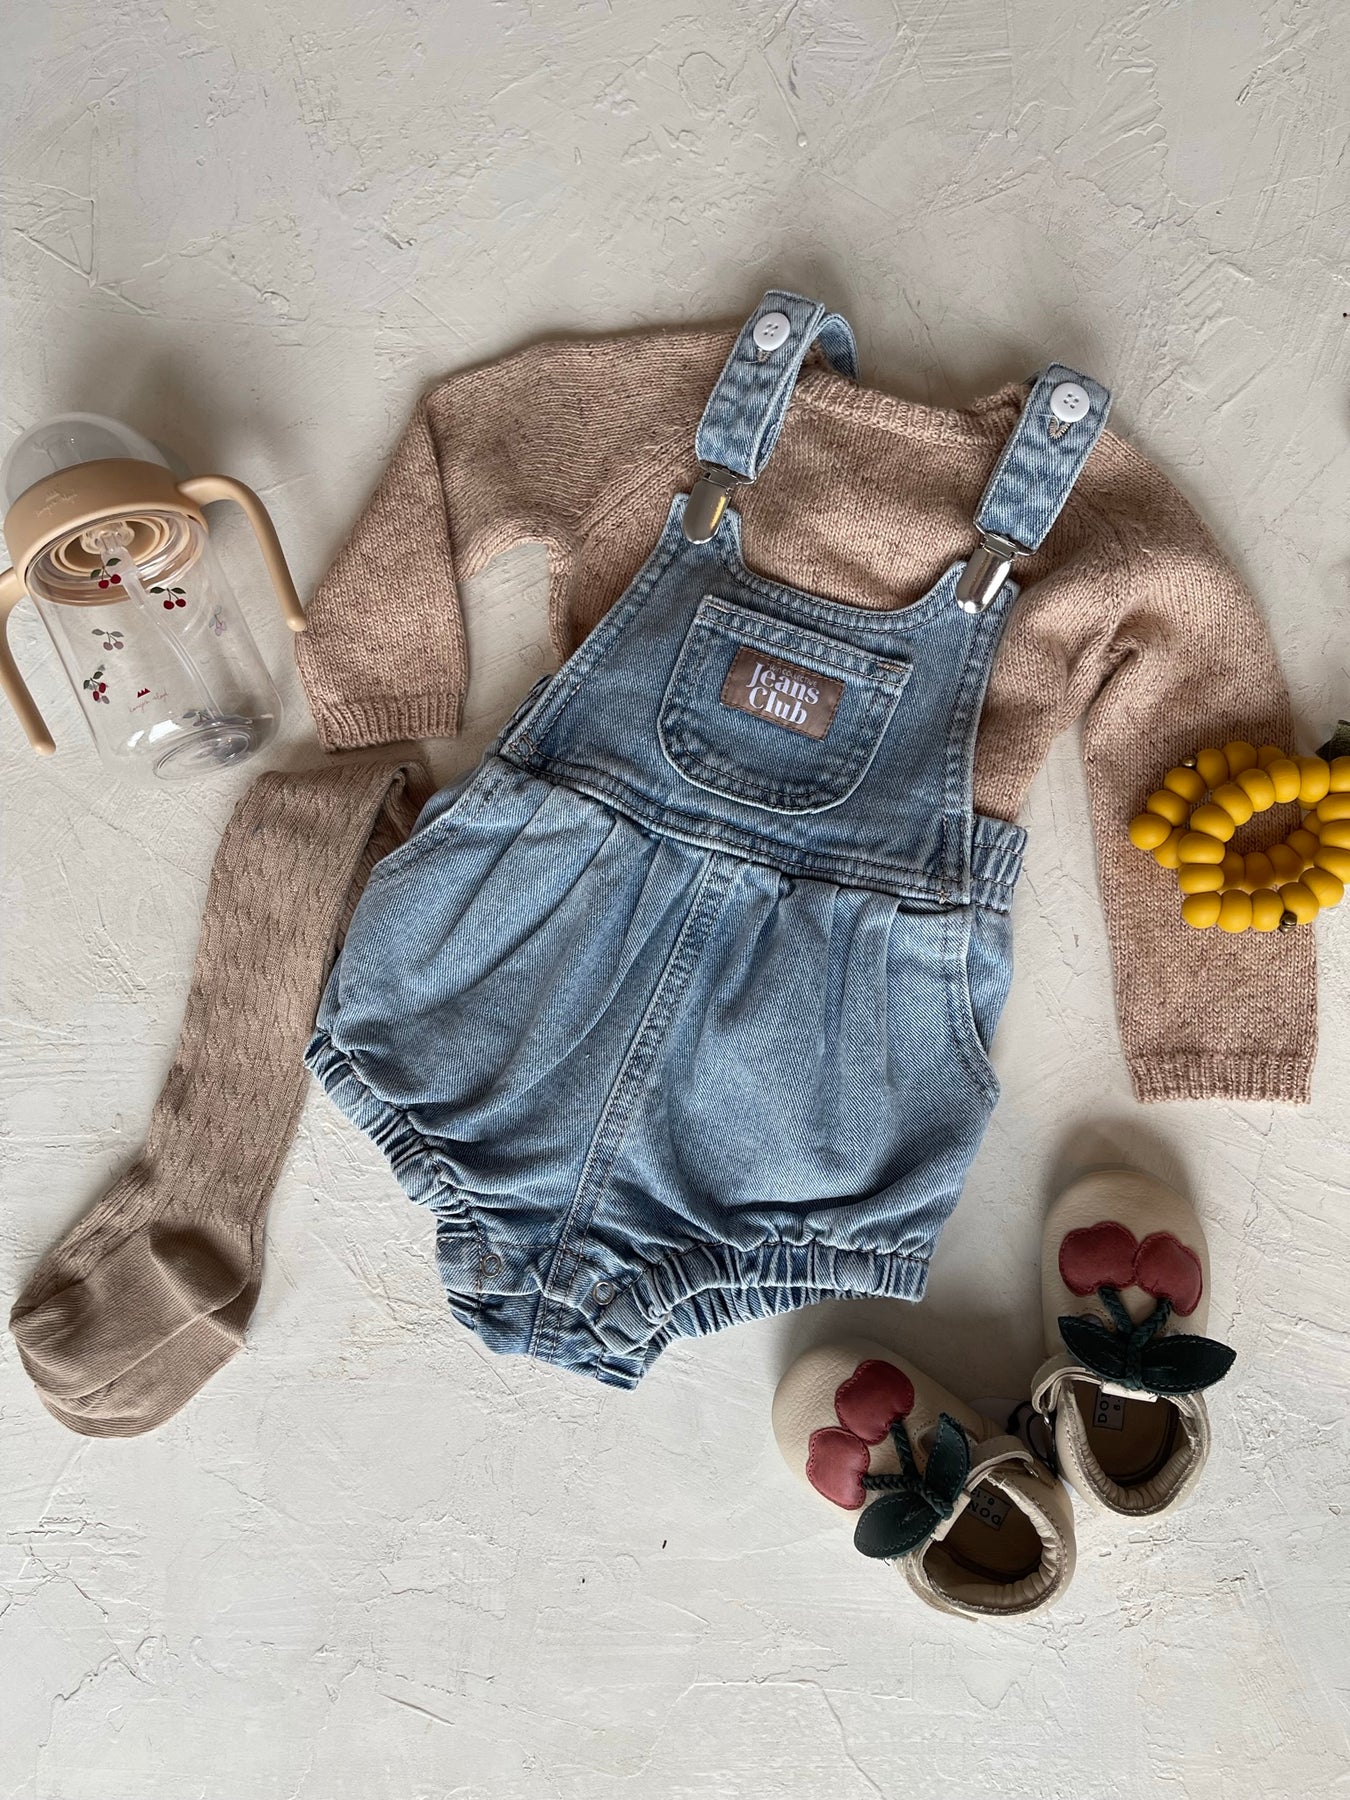 Baby overalls with leather cherry shoes and a lemon teether